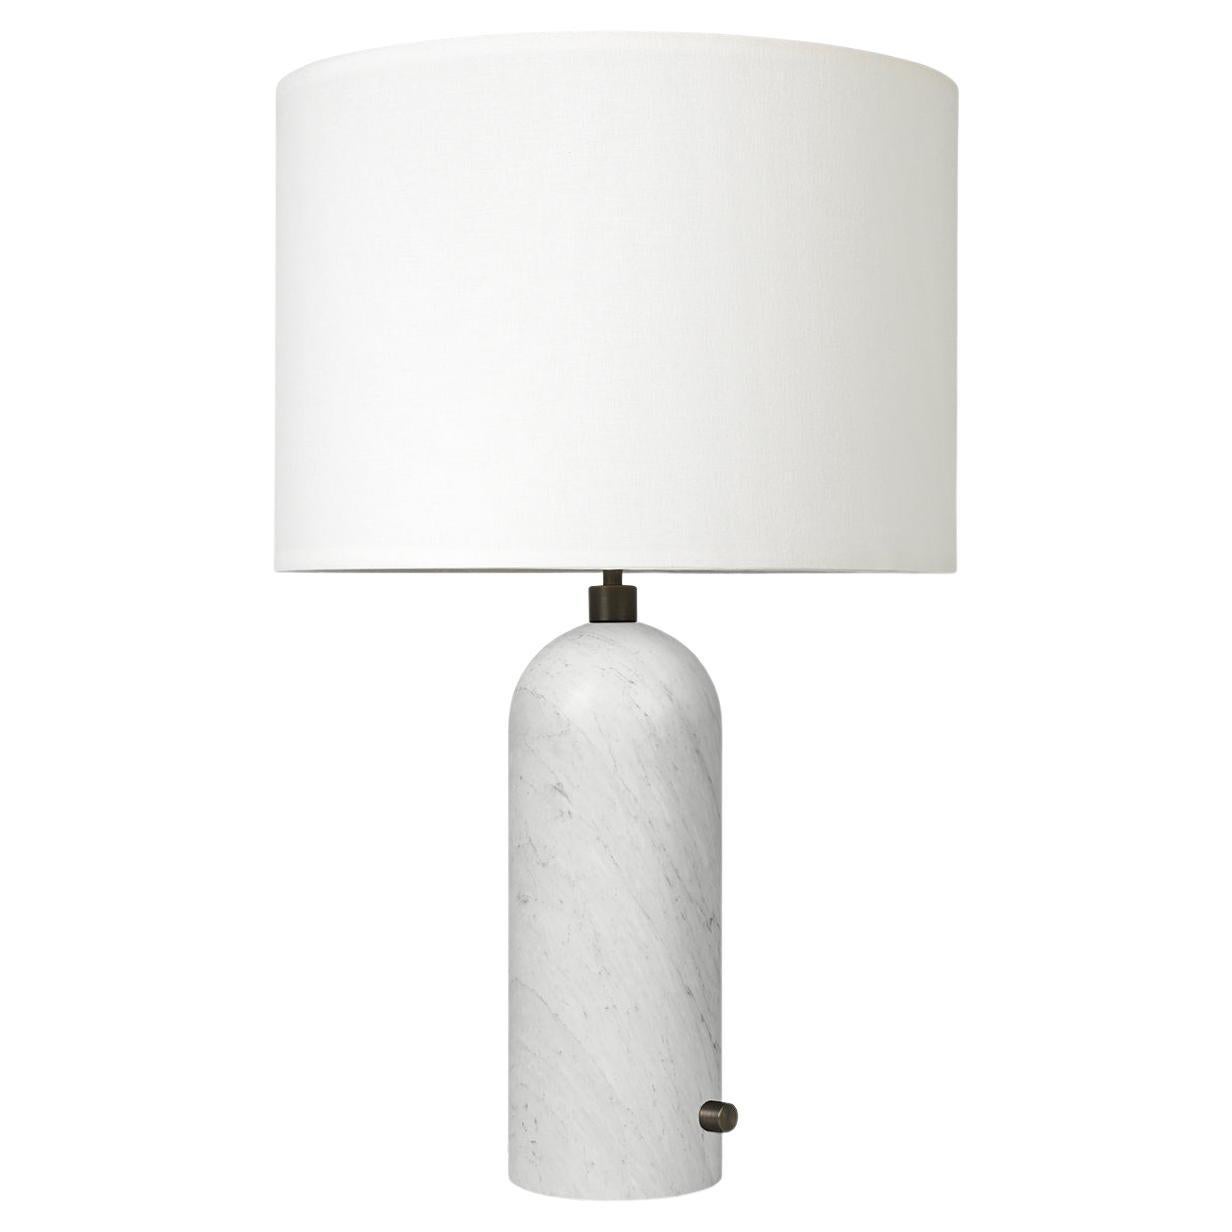 Gravity Table Lamp - Large, White Marble, White